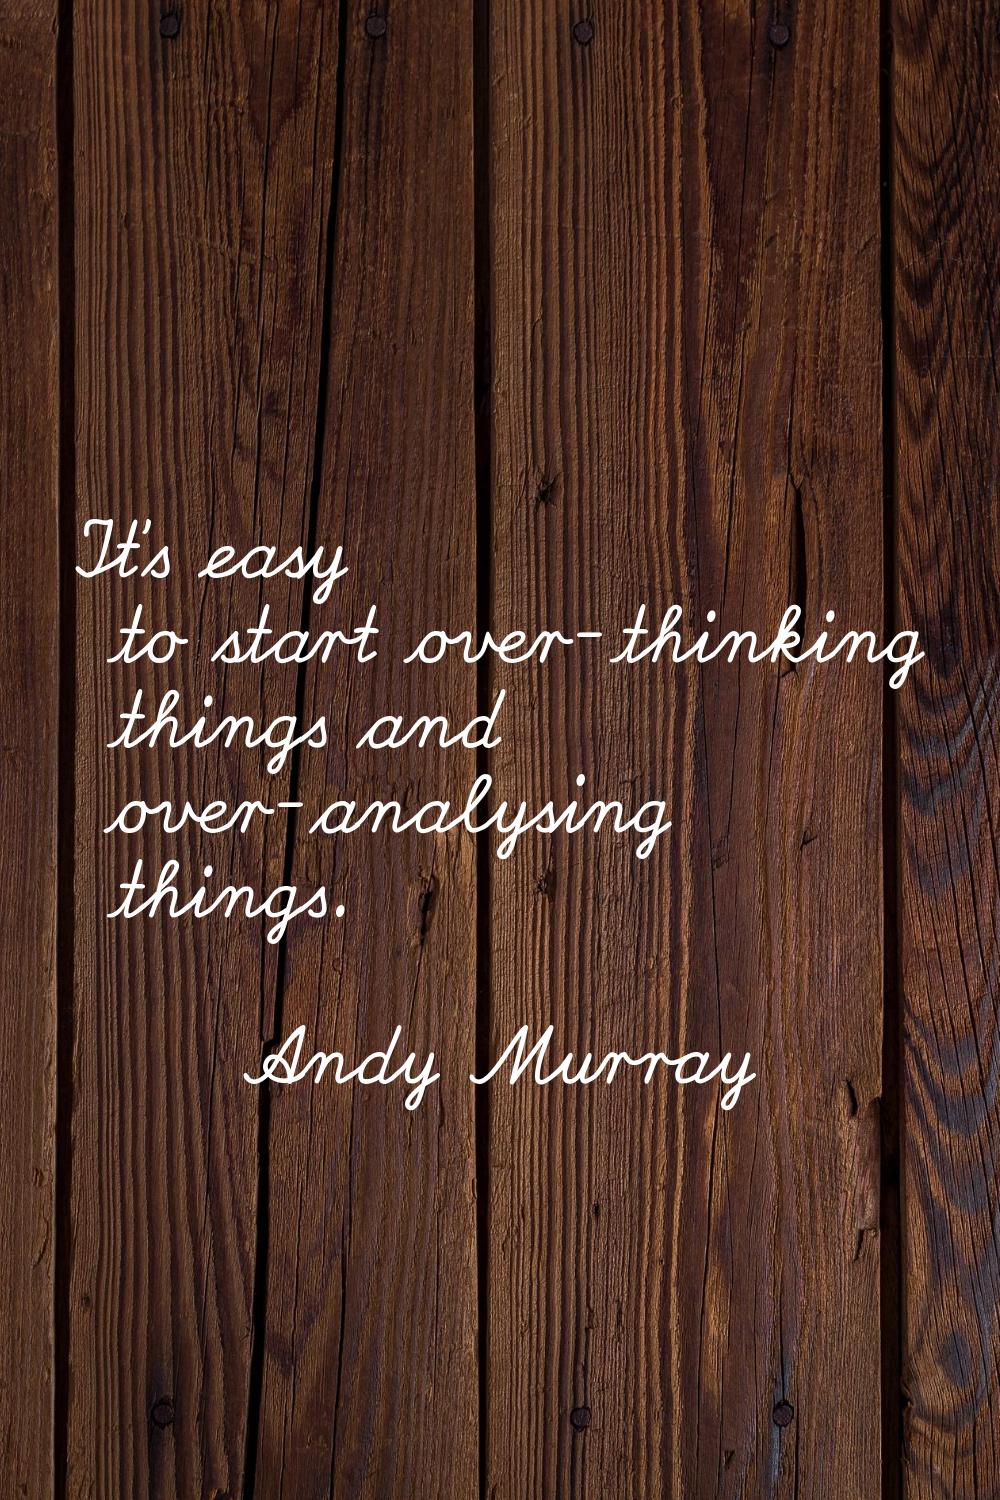 It's easy to start over-thinking things and over-analysing things.